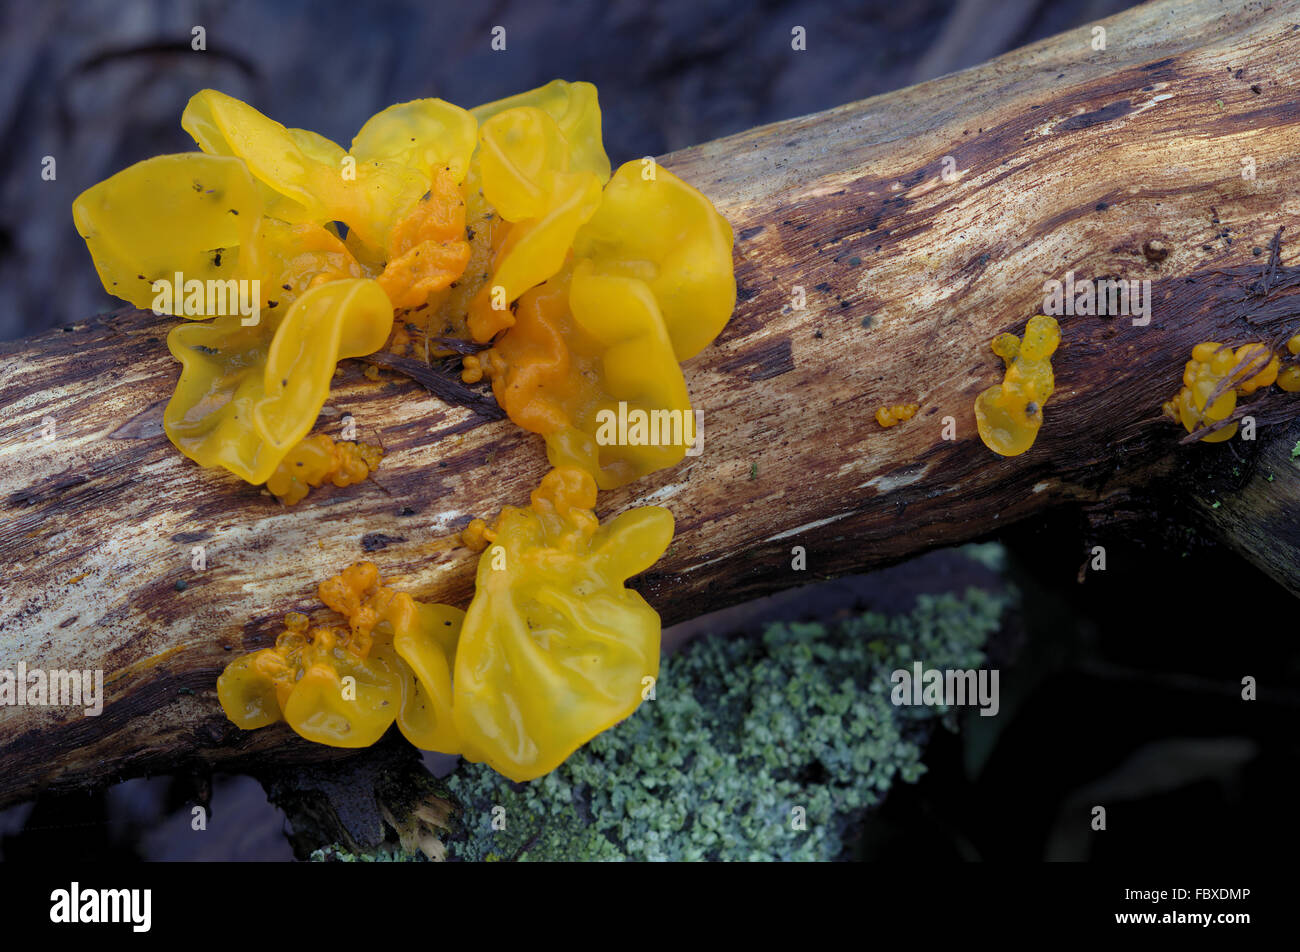 Golden gelly fungus on wood Stock Photo